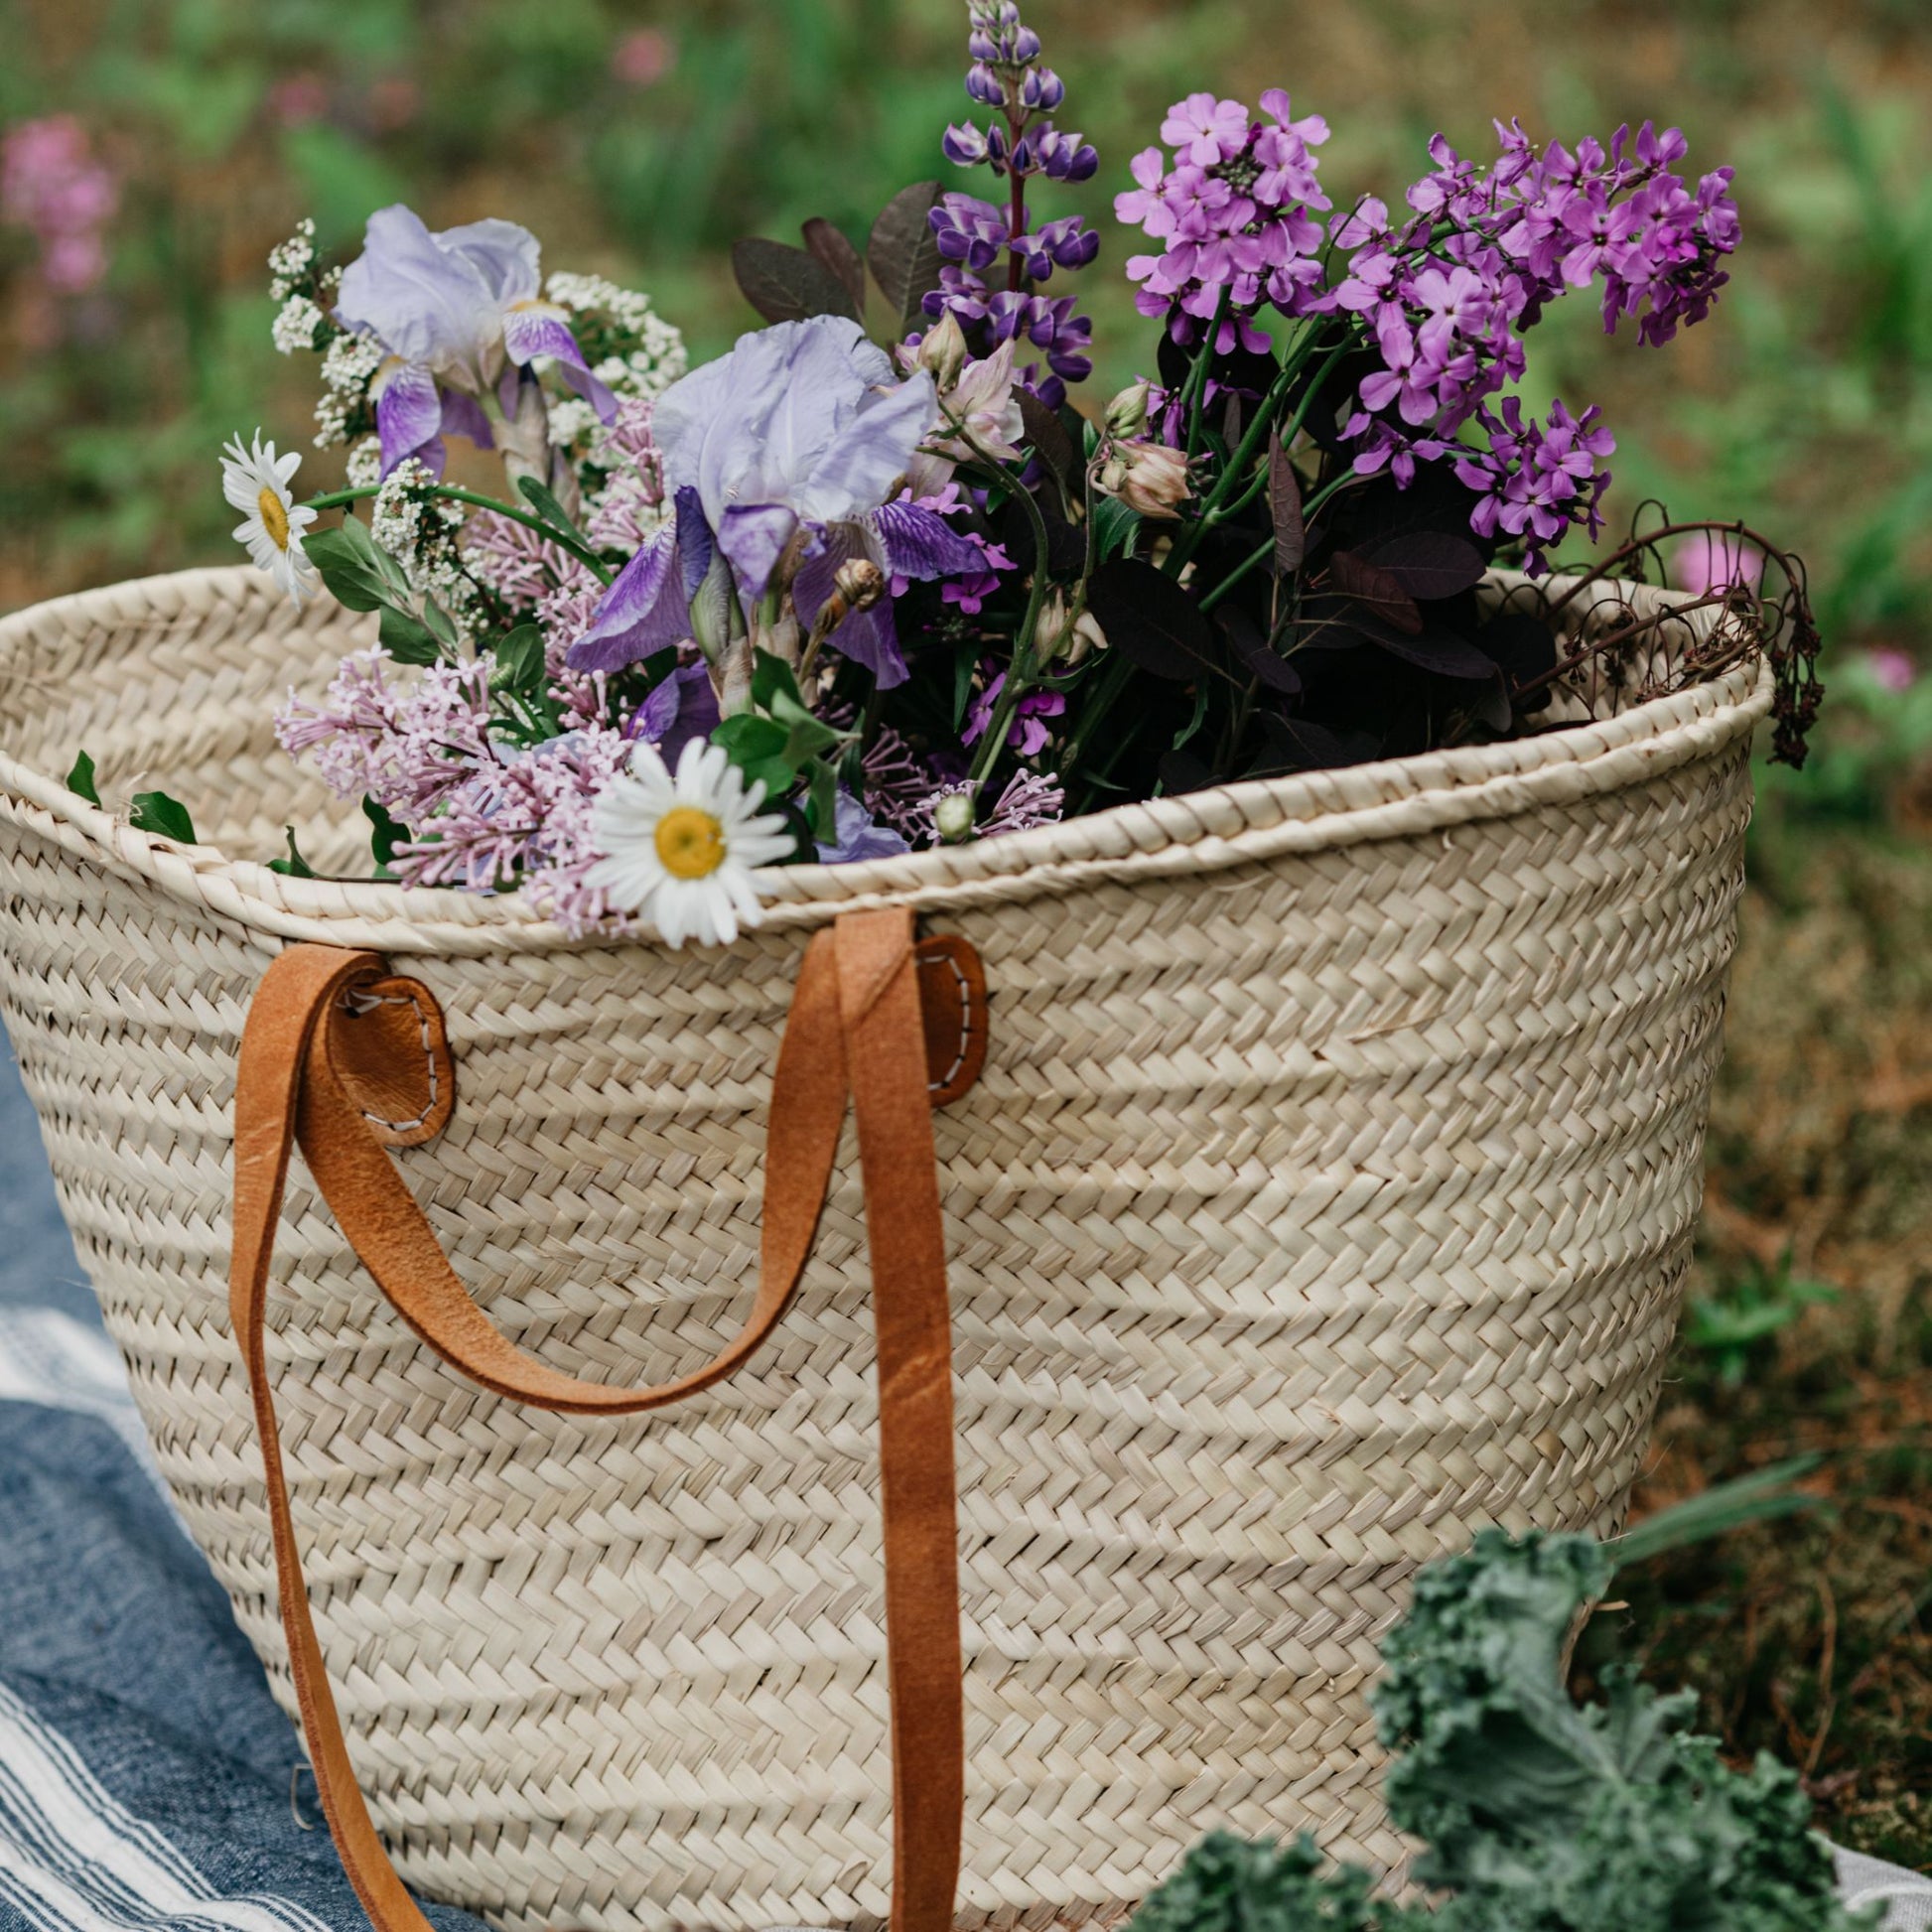 French Market Tote Basket with flowers in it resting on grassland.